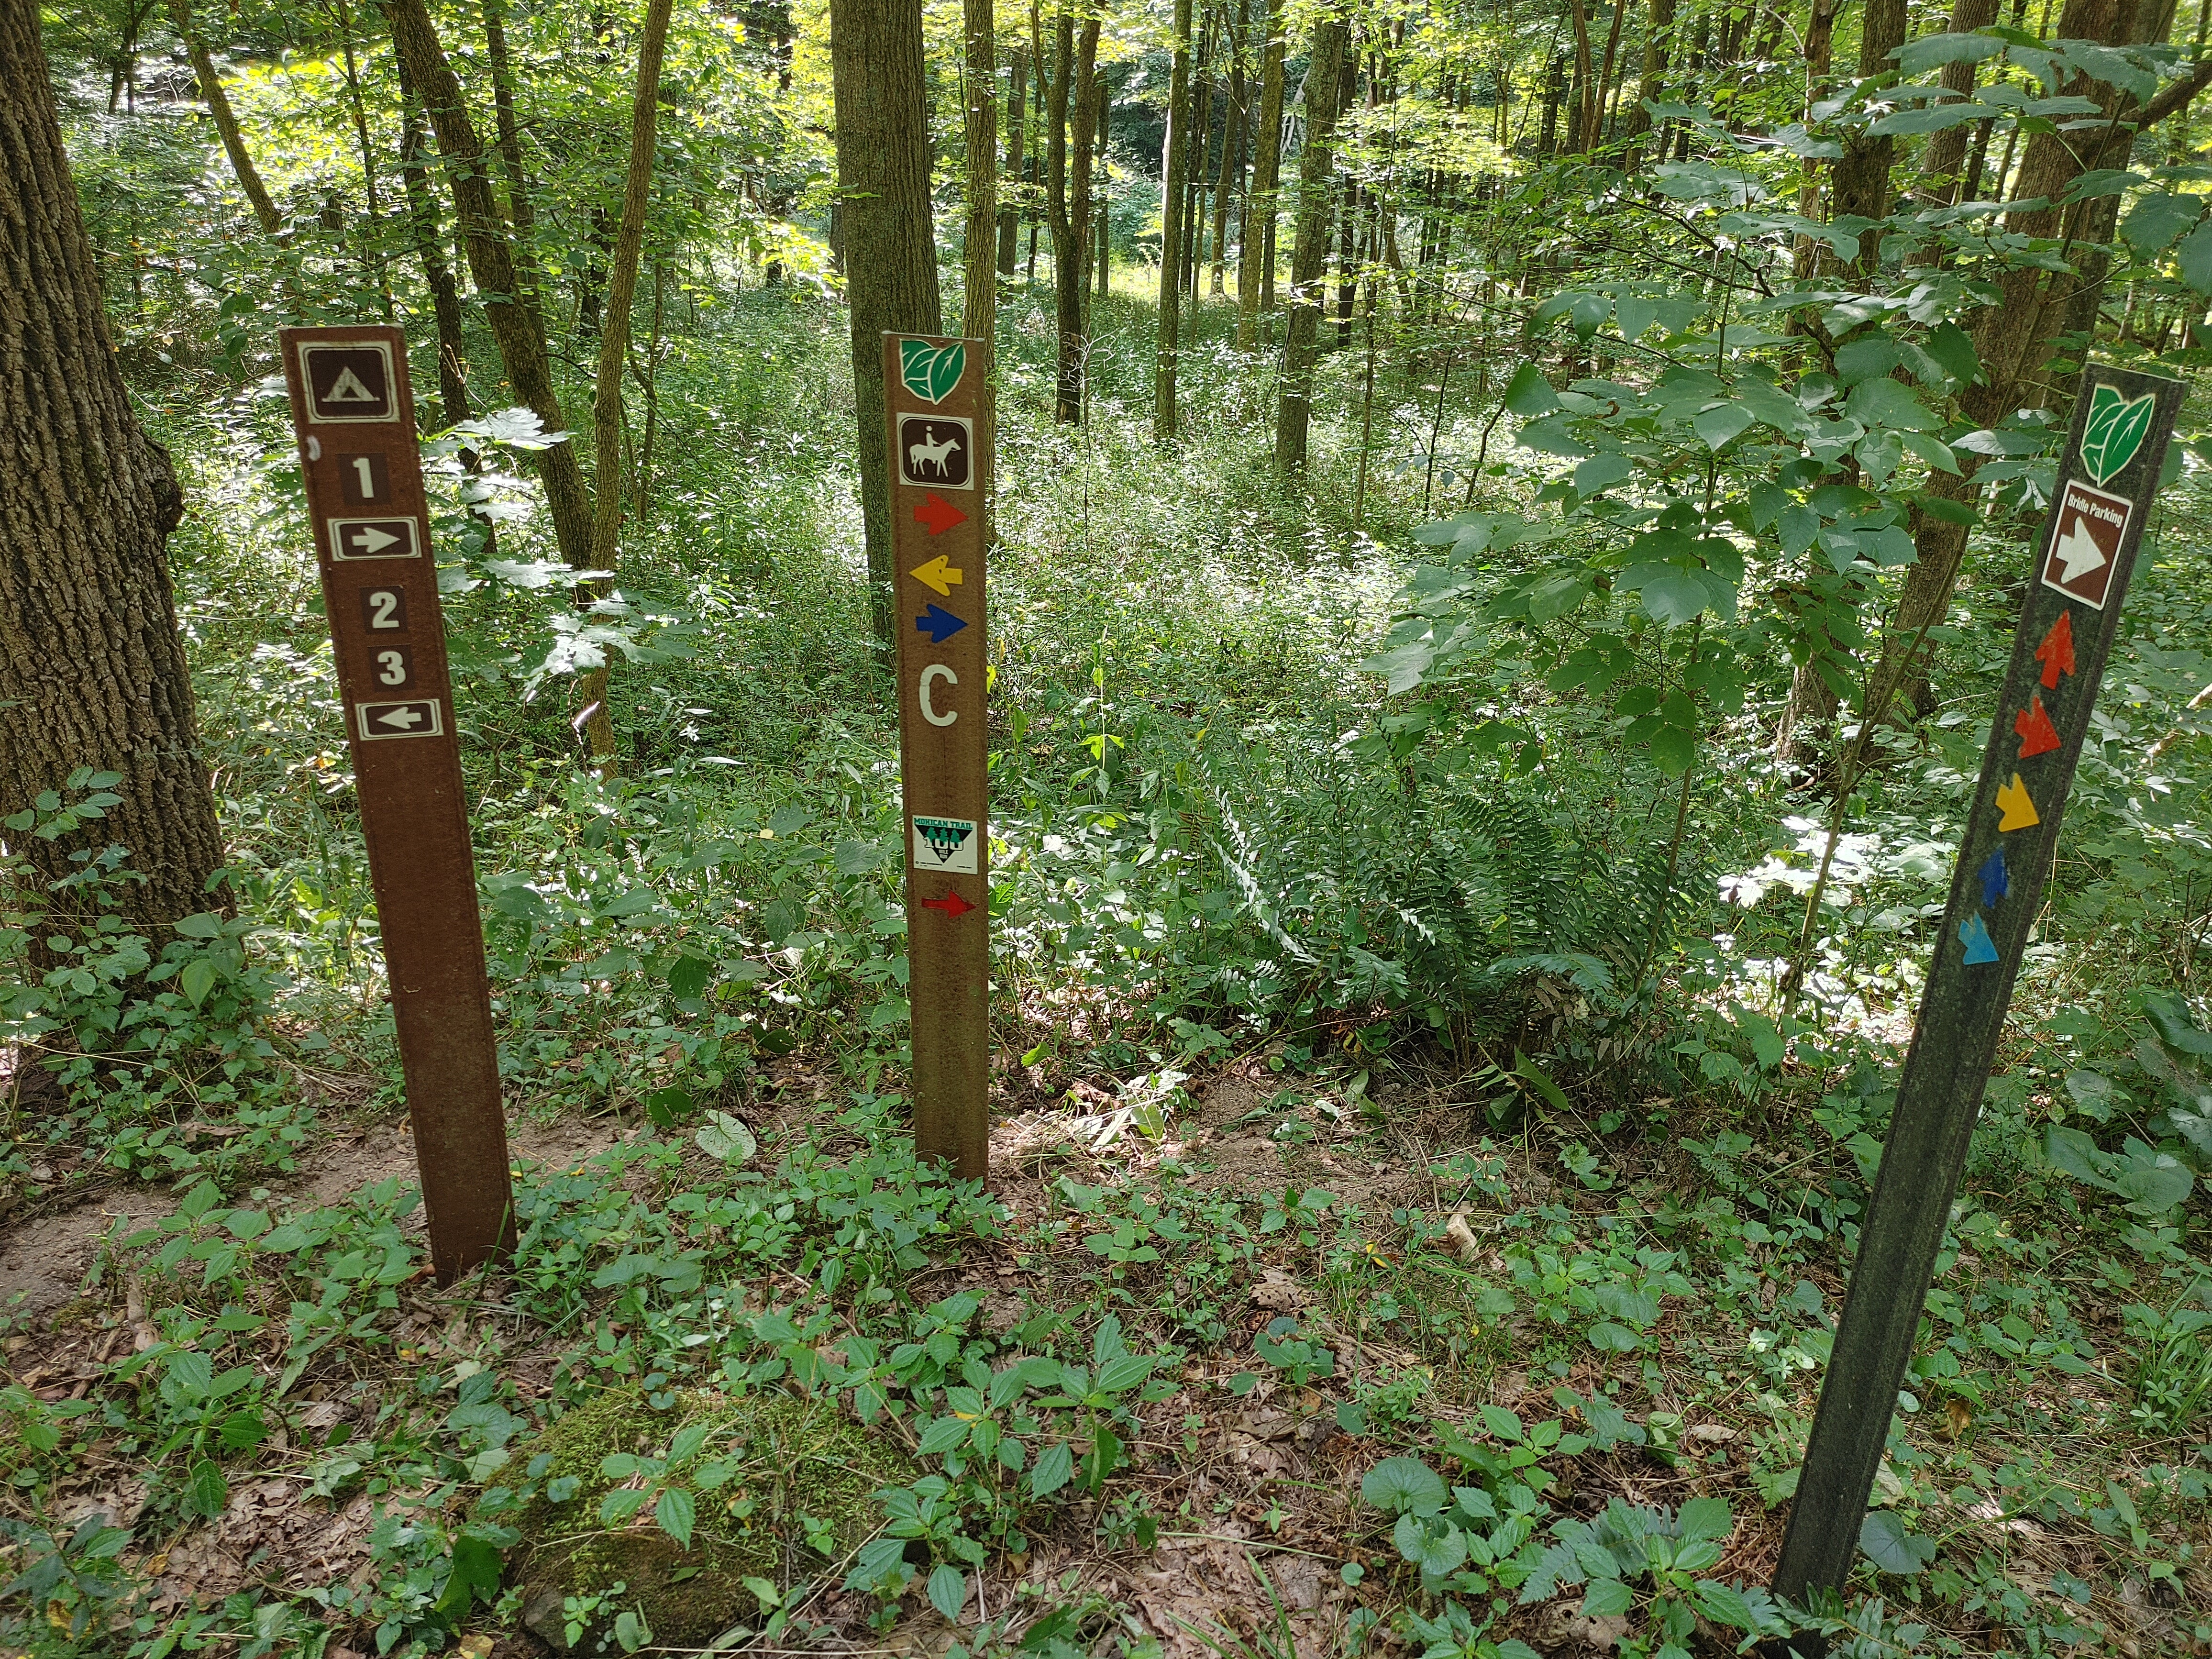 This is why I told you to download the various trails as the colors can get confusing. It is well marked but we still had an adventure due to some details being left out such as what certain letters mean on the photo of another Mohican map that I took earlier vs the provided paper map at the trail head.